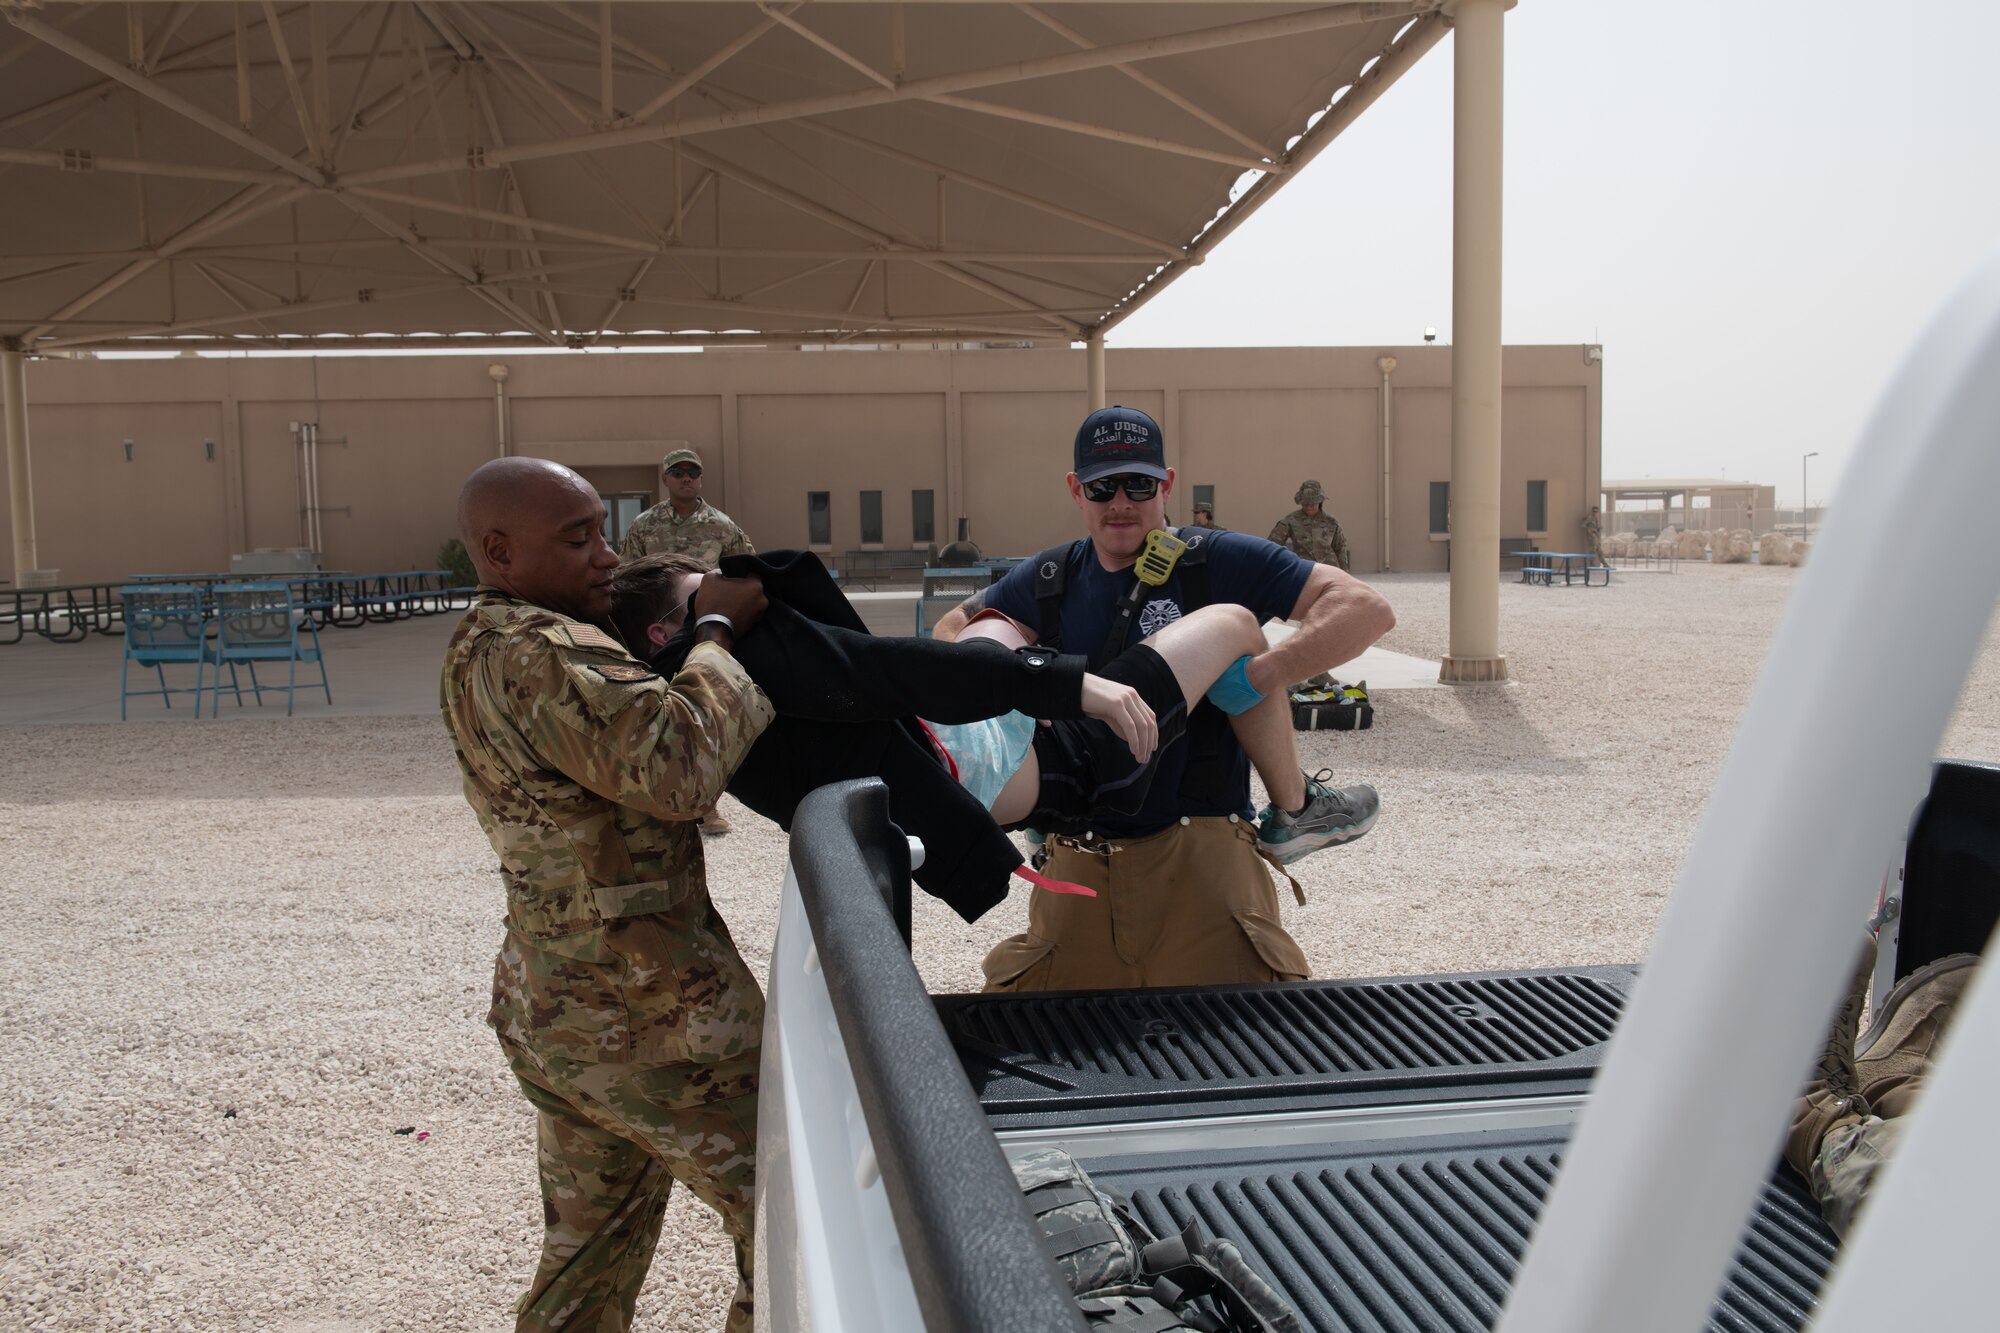 U.S. Air Force firefighters with the 379th Expeditionary Civil Engineering Squadron load a simulated casualty into the back of a pickup truck during an exercise on Al Udeid Air Base, Qatar, June 27, 2022. First responders provide the quickest and most effective care that the scenario will allow. (U.S. Air National Guard photo by Airman 1st Class Constantine Bambakidis)